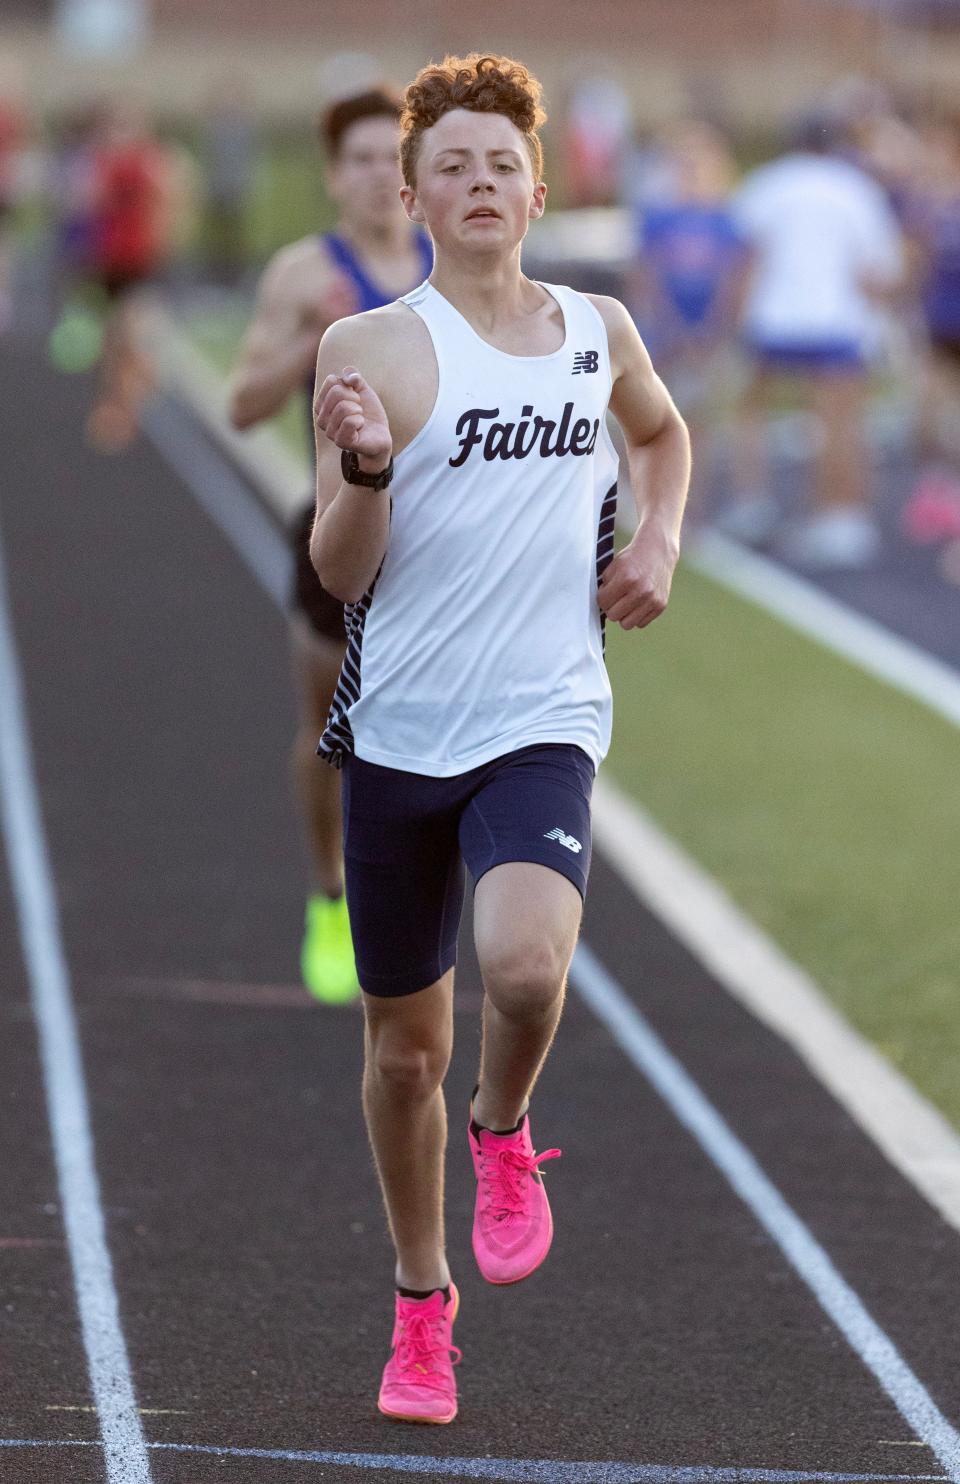 Fairless' Andrew Hearn, shown here at last year's PAC-7 Track and Field Championships, won the 1,600-meter run and was runner-up in the 3,200 at Saturday's Fairless Falcon Track and Field Invitational.